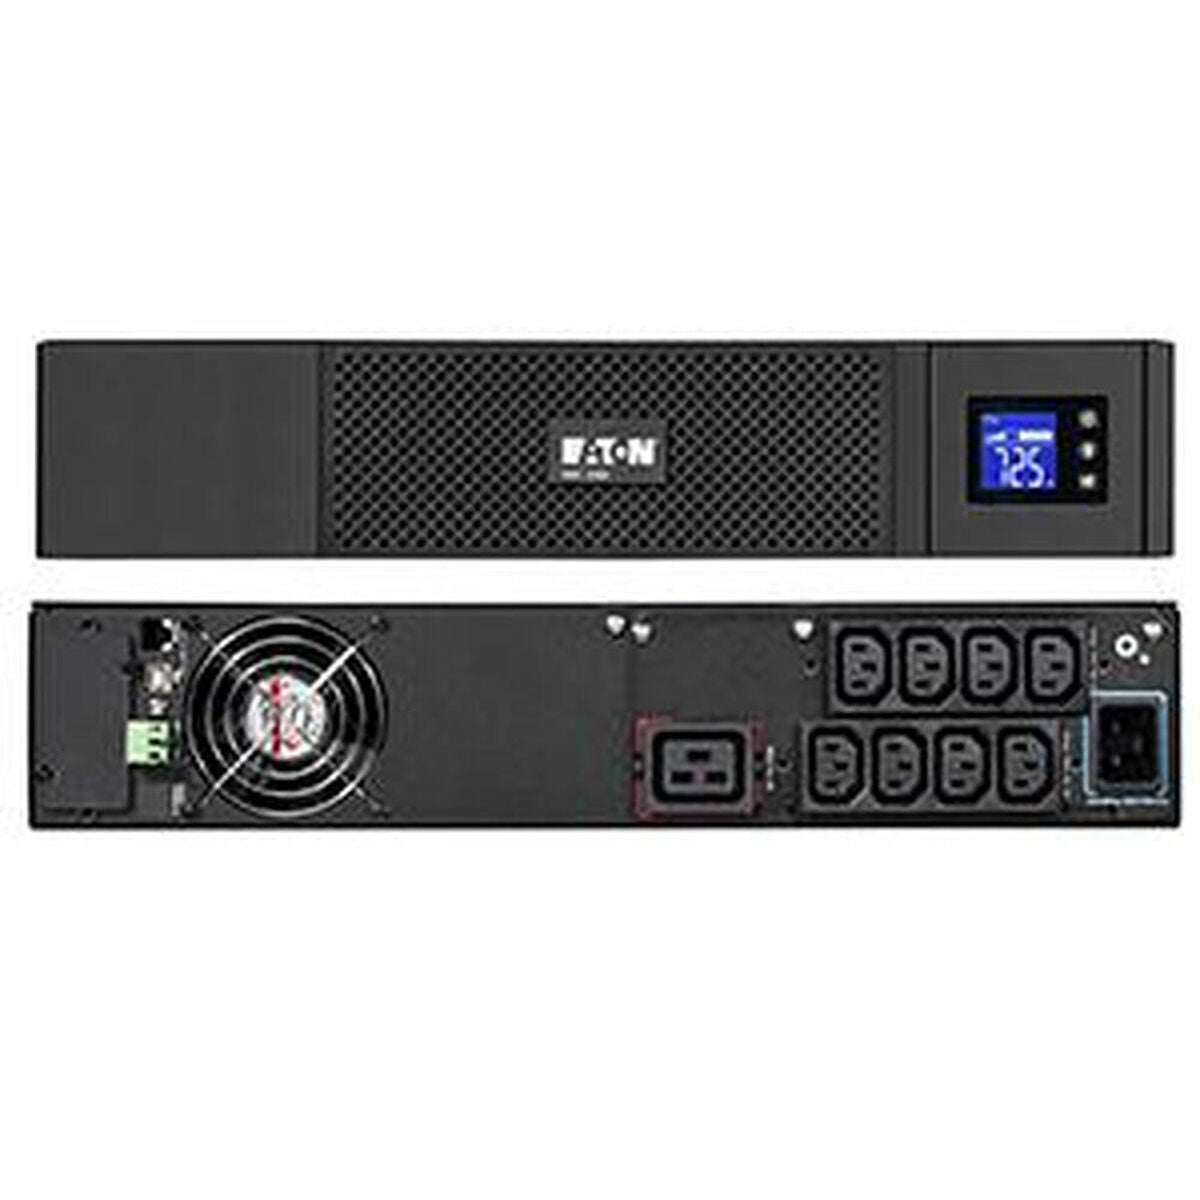 Uninterruptible Power Supply System Interactive UPS Eaton 5SC2200IRT 1980 W, Eaton, Computing, Accessories, uninterruptible-power-supply-system-interactive-ups-eaton-5sc2200irt-1980-w, Brand_Eaton, category-reference-2609, category-reference-2642, category-reference-2845, category-reference-t-19685, category-reference-t-19908, category-reference-t-21341, computers / peripherals, Condition_NEW, office, Price_+ 1000, RiotNook